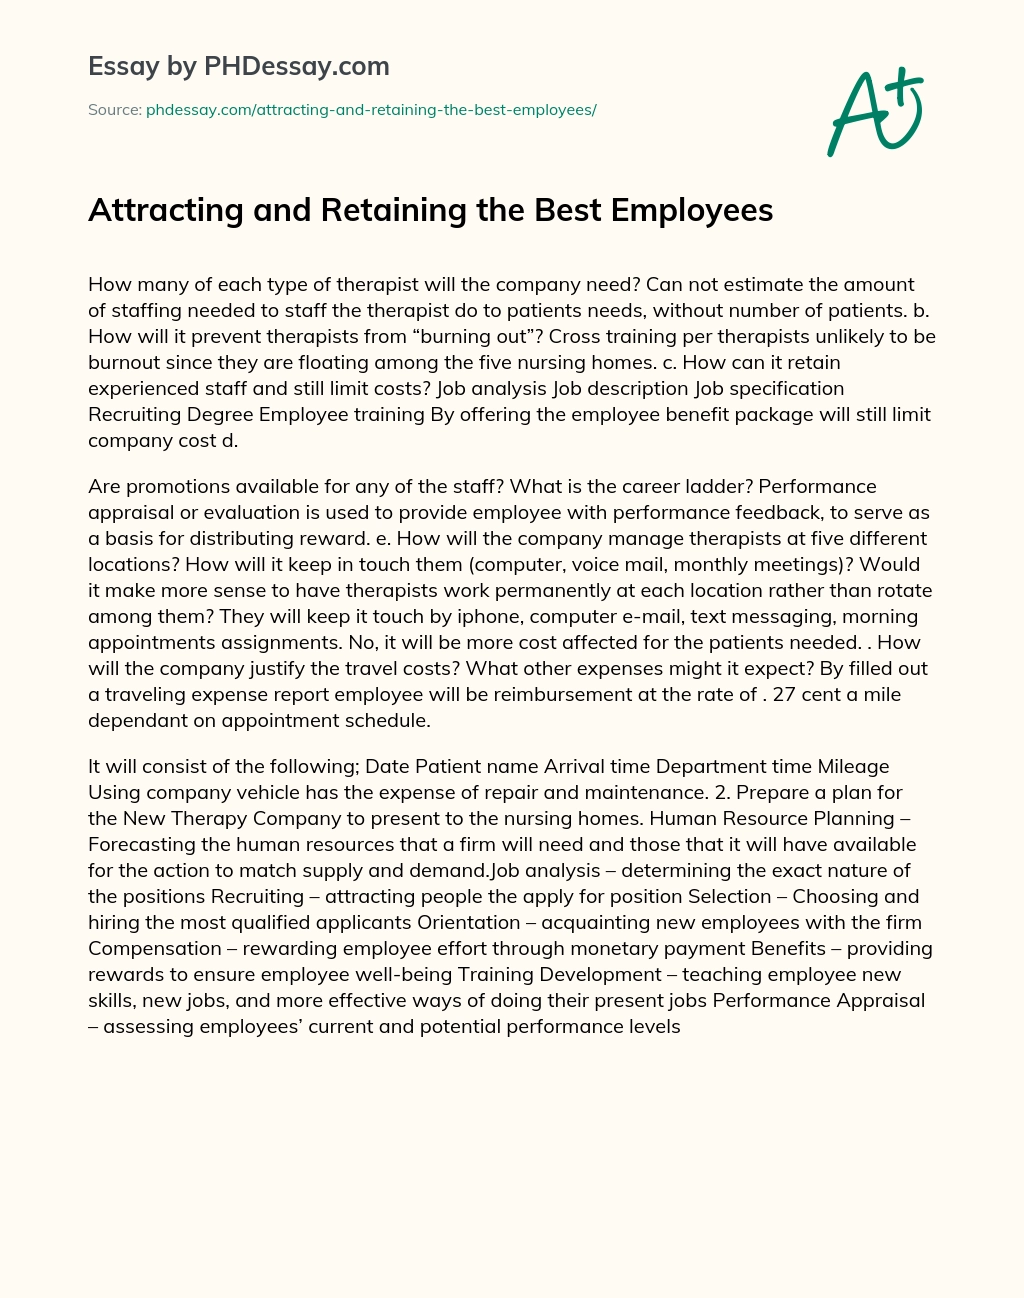 Attracting and Retaining the Best Employees essay